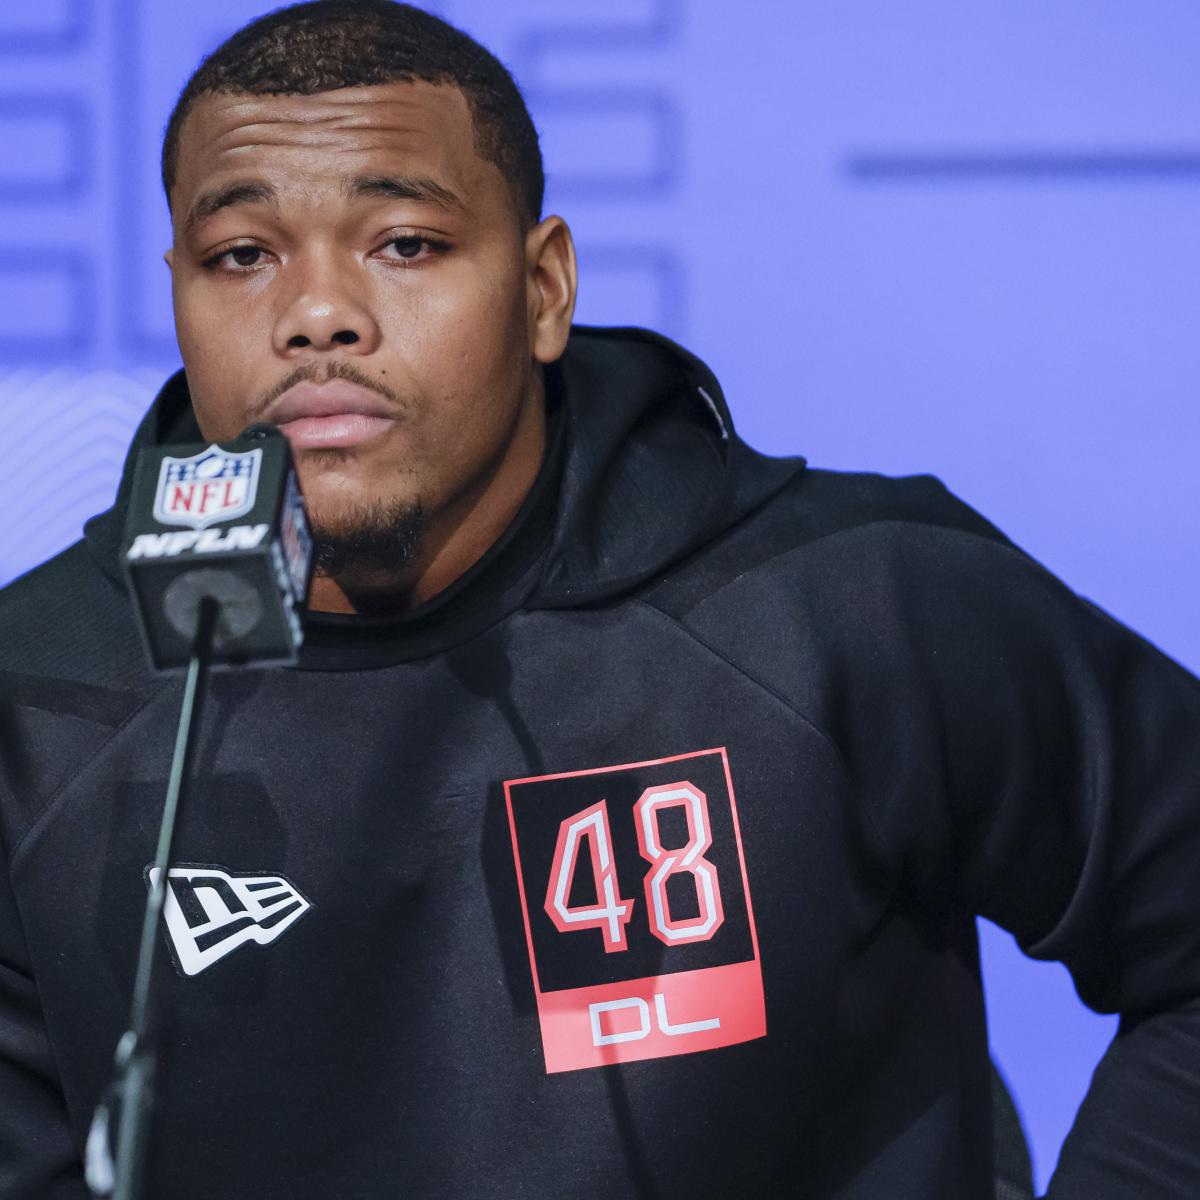 NFL Draft 2022 Results: Tracking the Full List of Picks and Selections - Bleacher Report